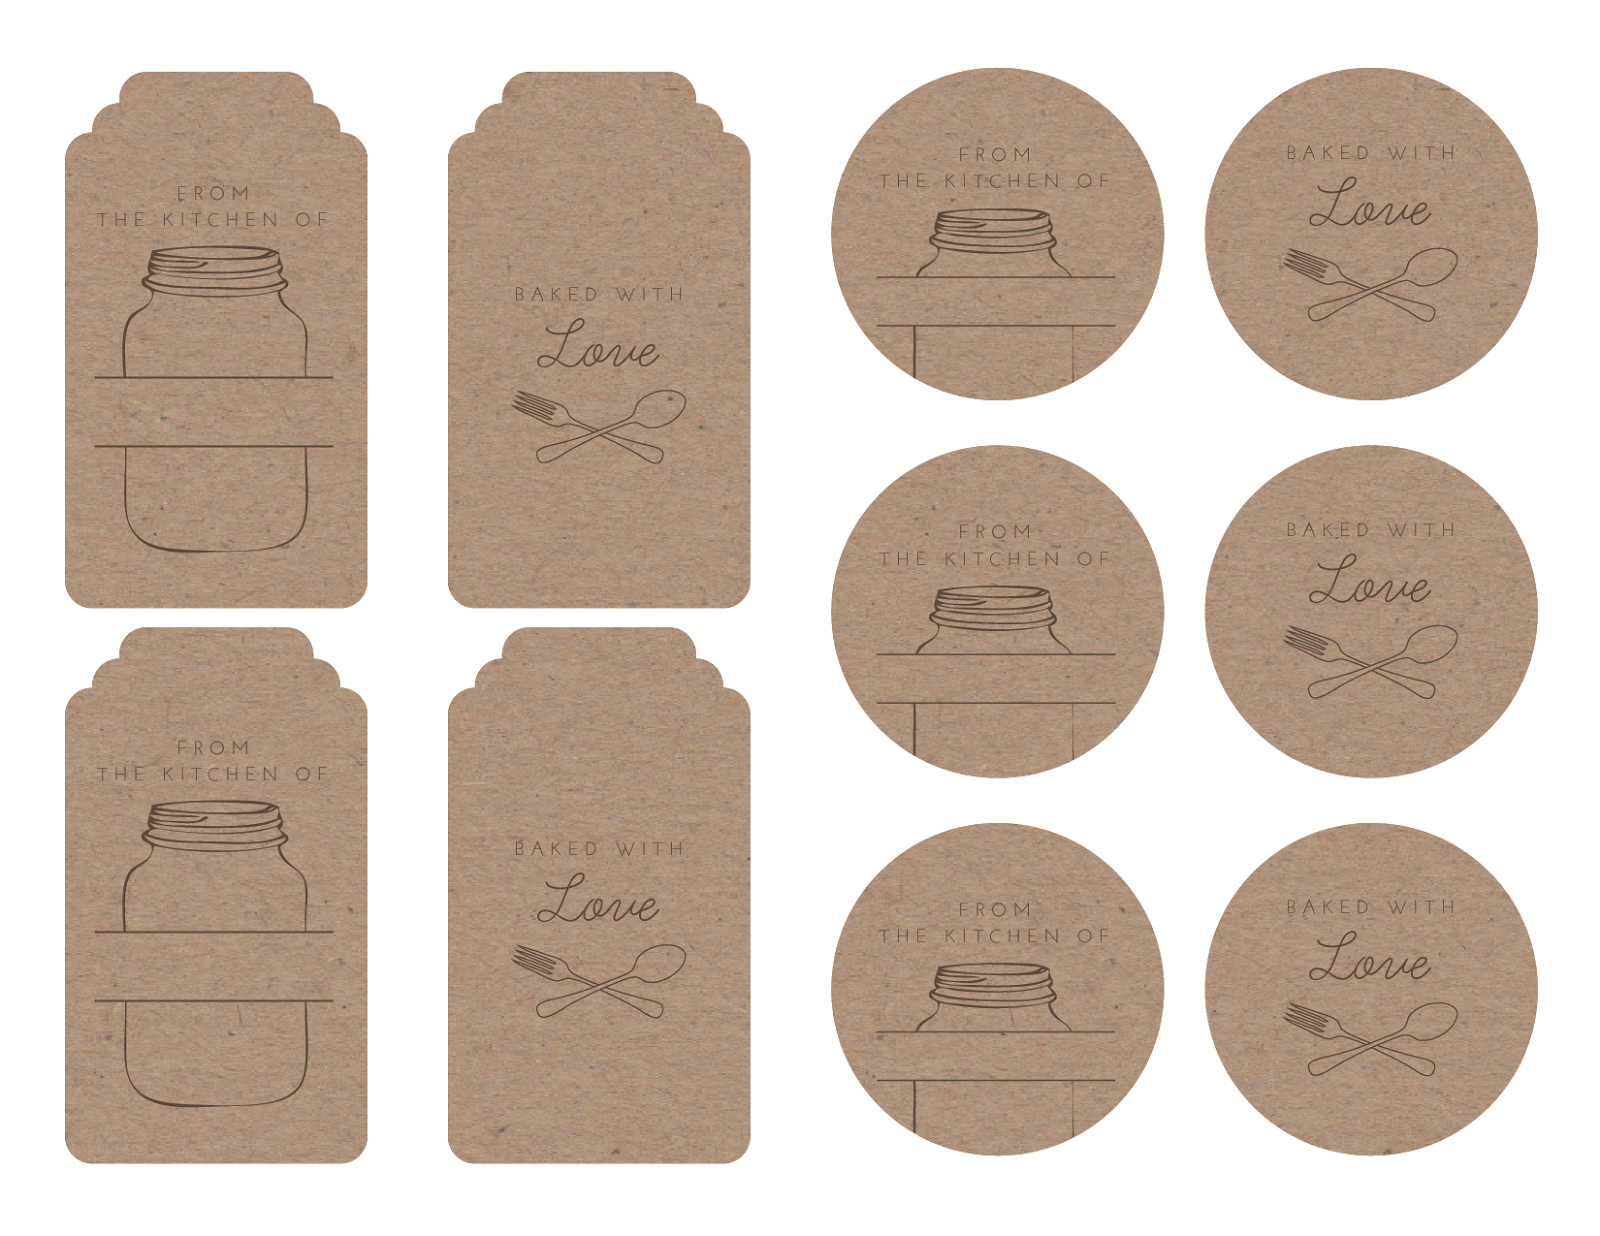 Homemade Tags For Your Baked Goods | Printables &amp;amp; Graphics | Bake - Free Printable Baking Labels